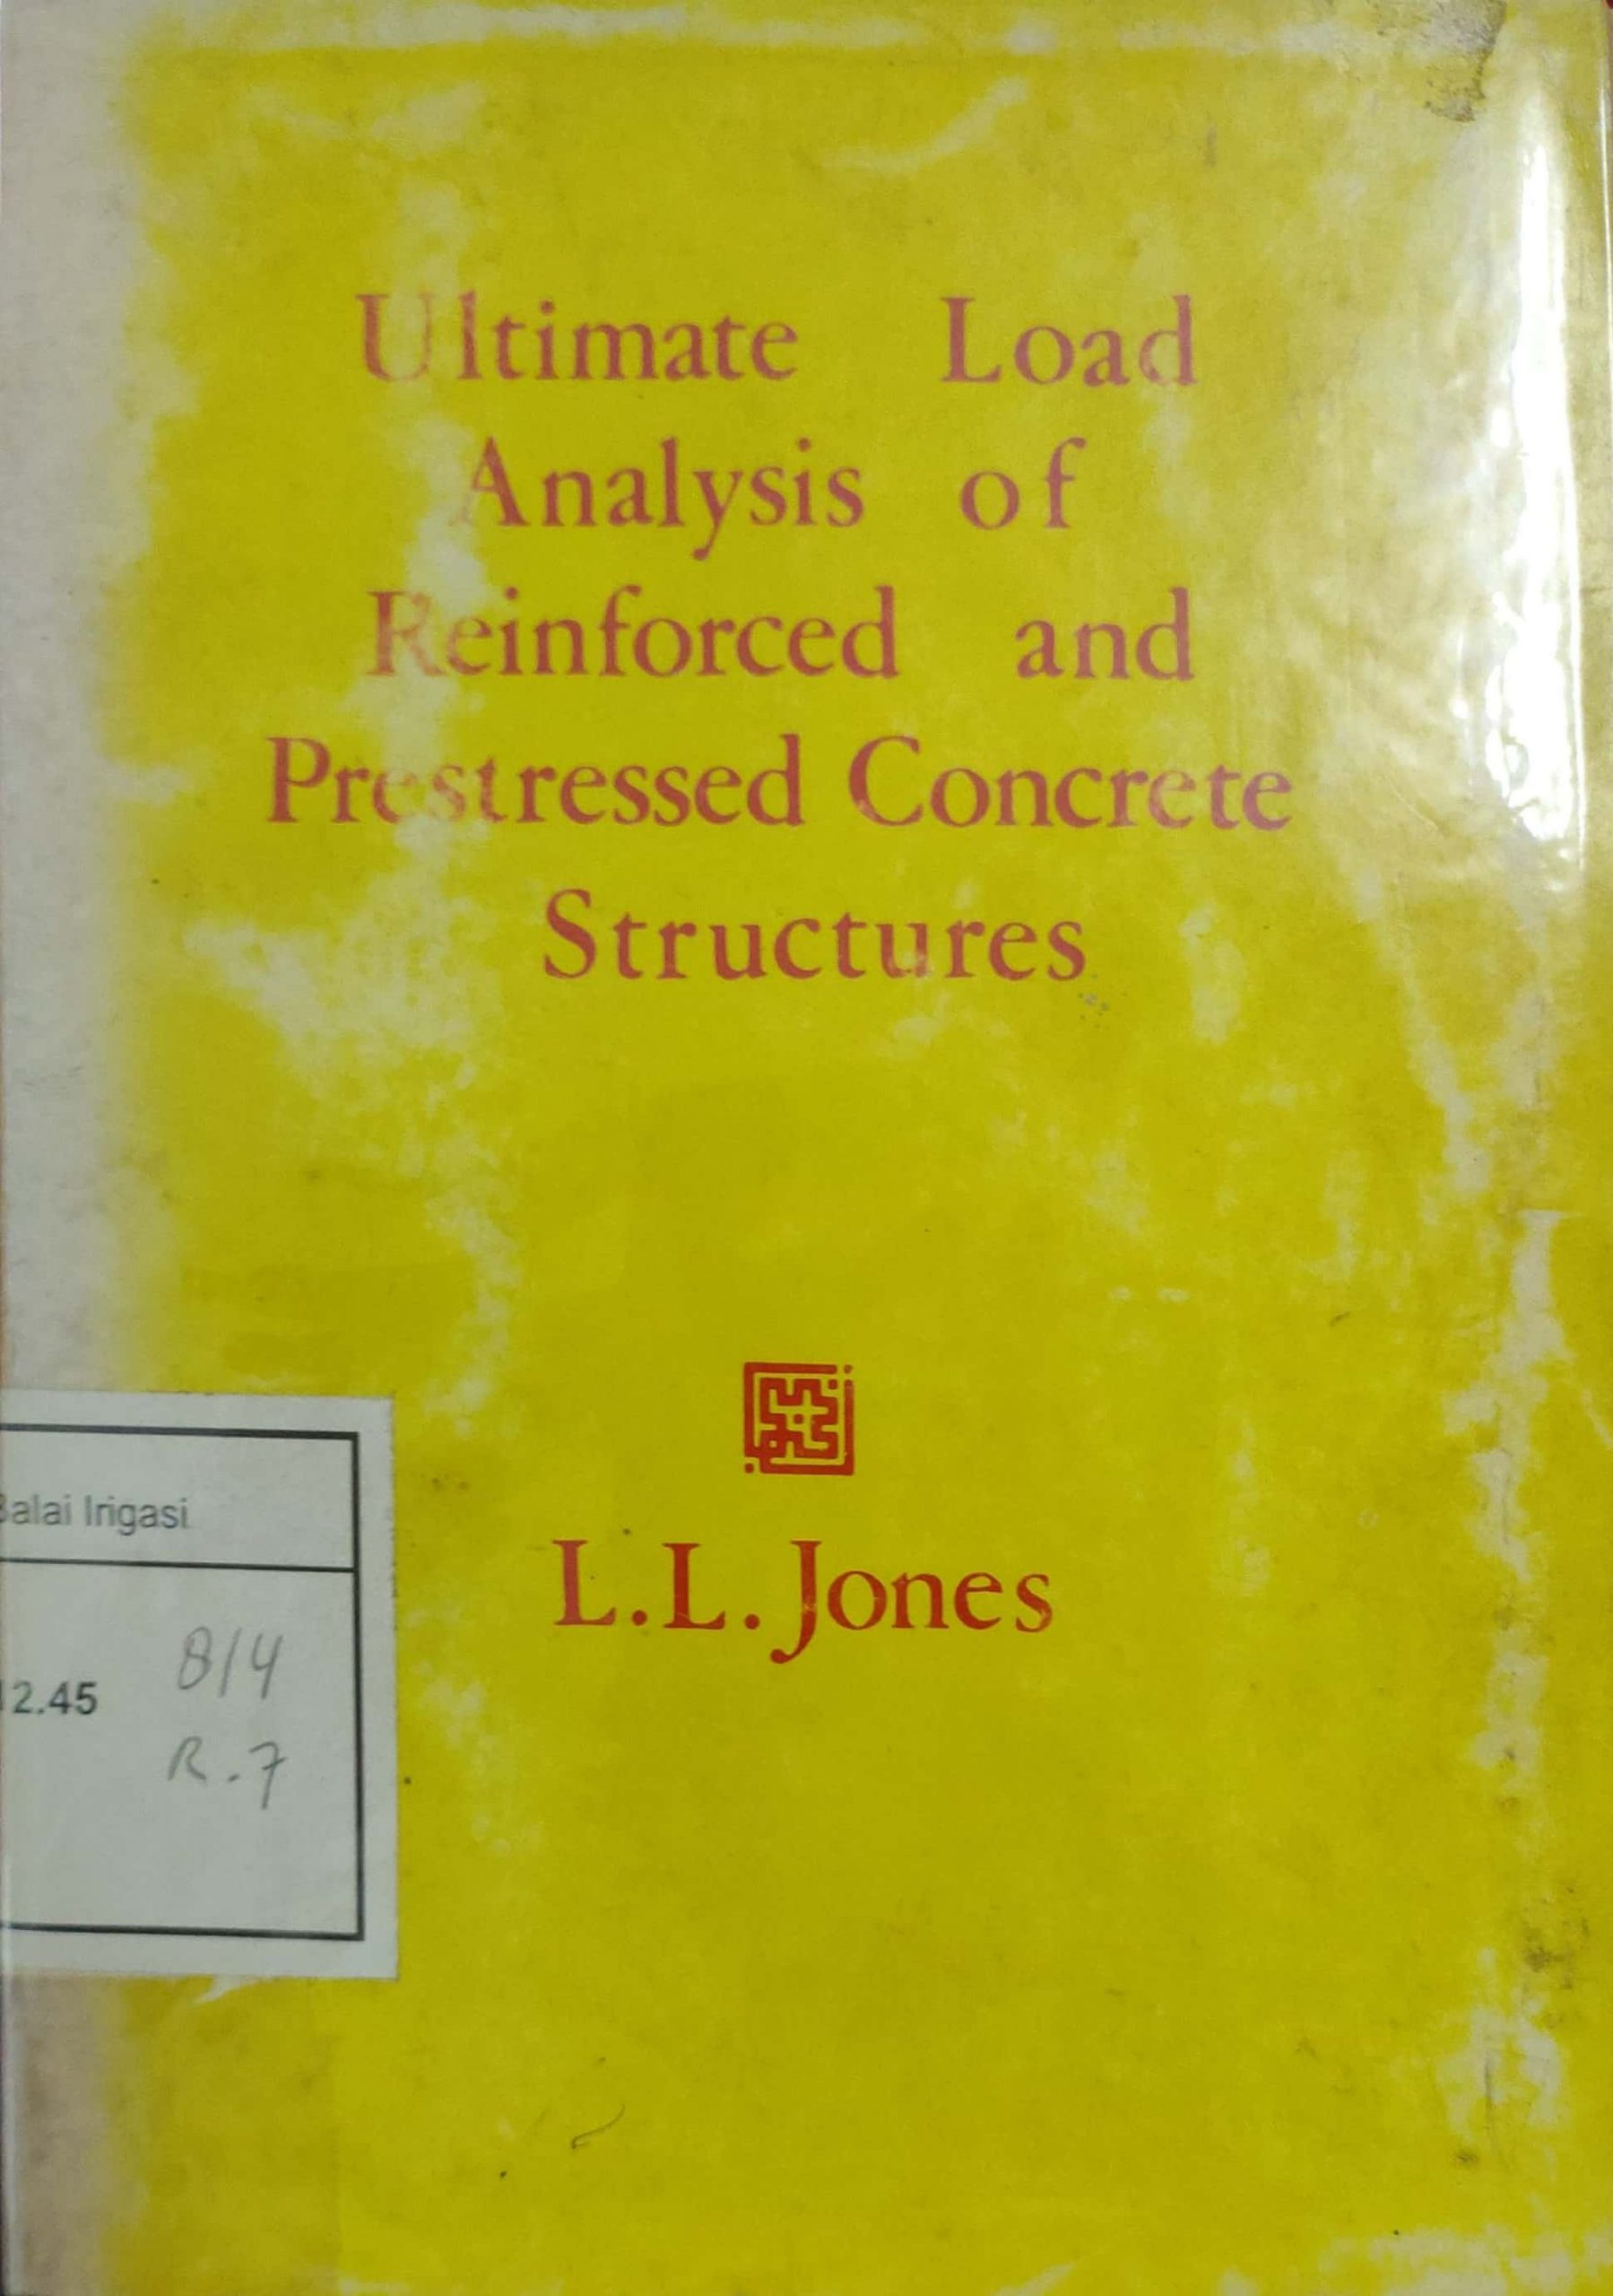 Ultimate load analysis of reinforced and prestressed concrete structures